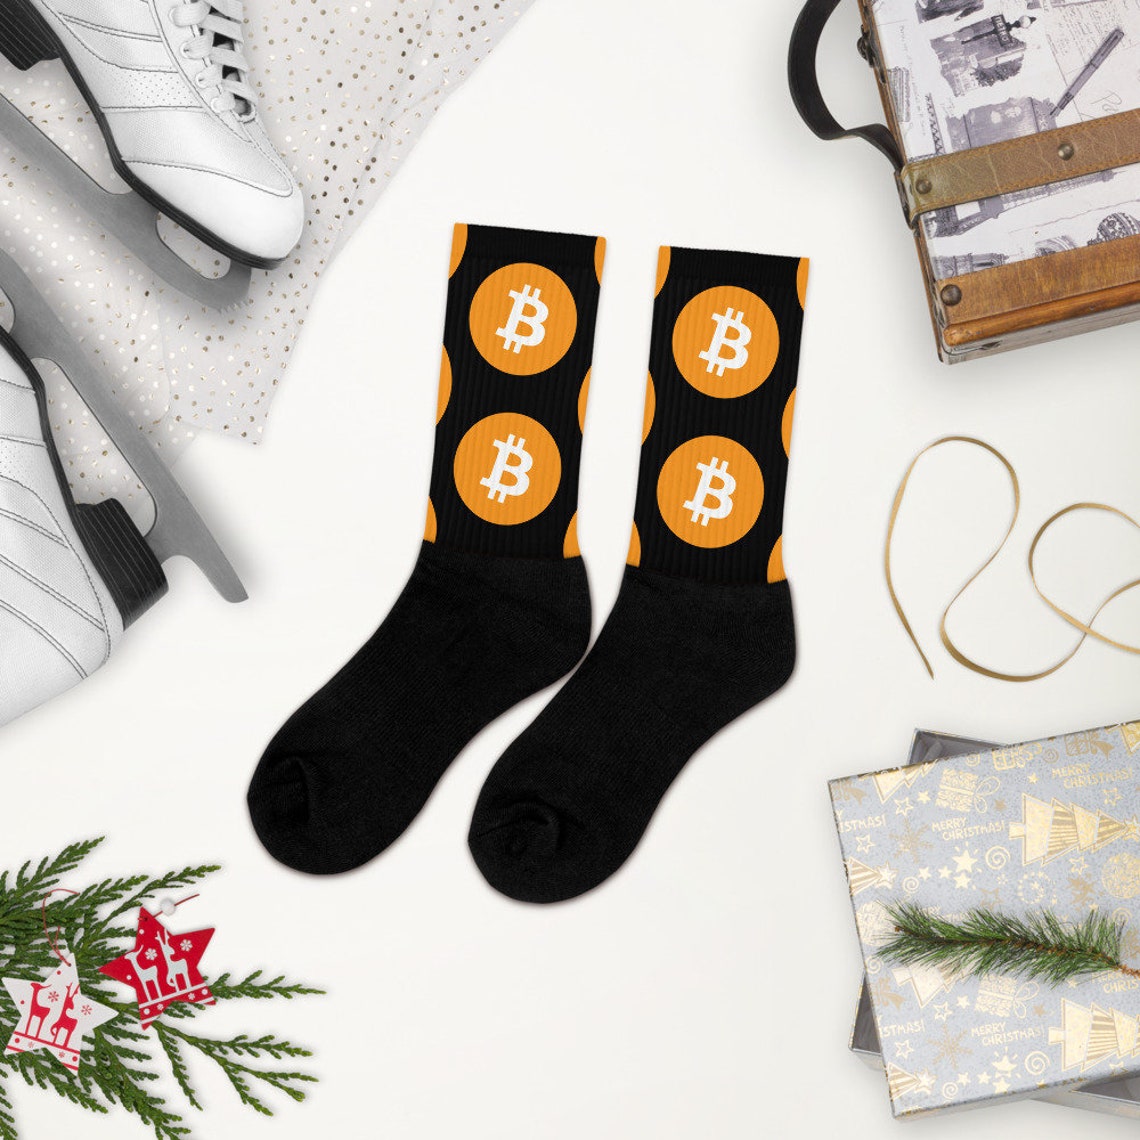 how to buy socks with bitcoin